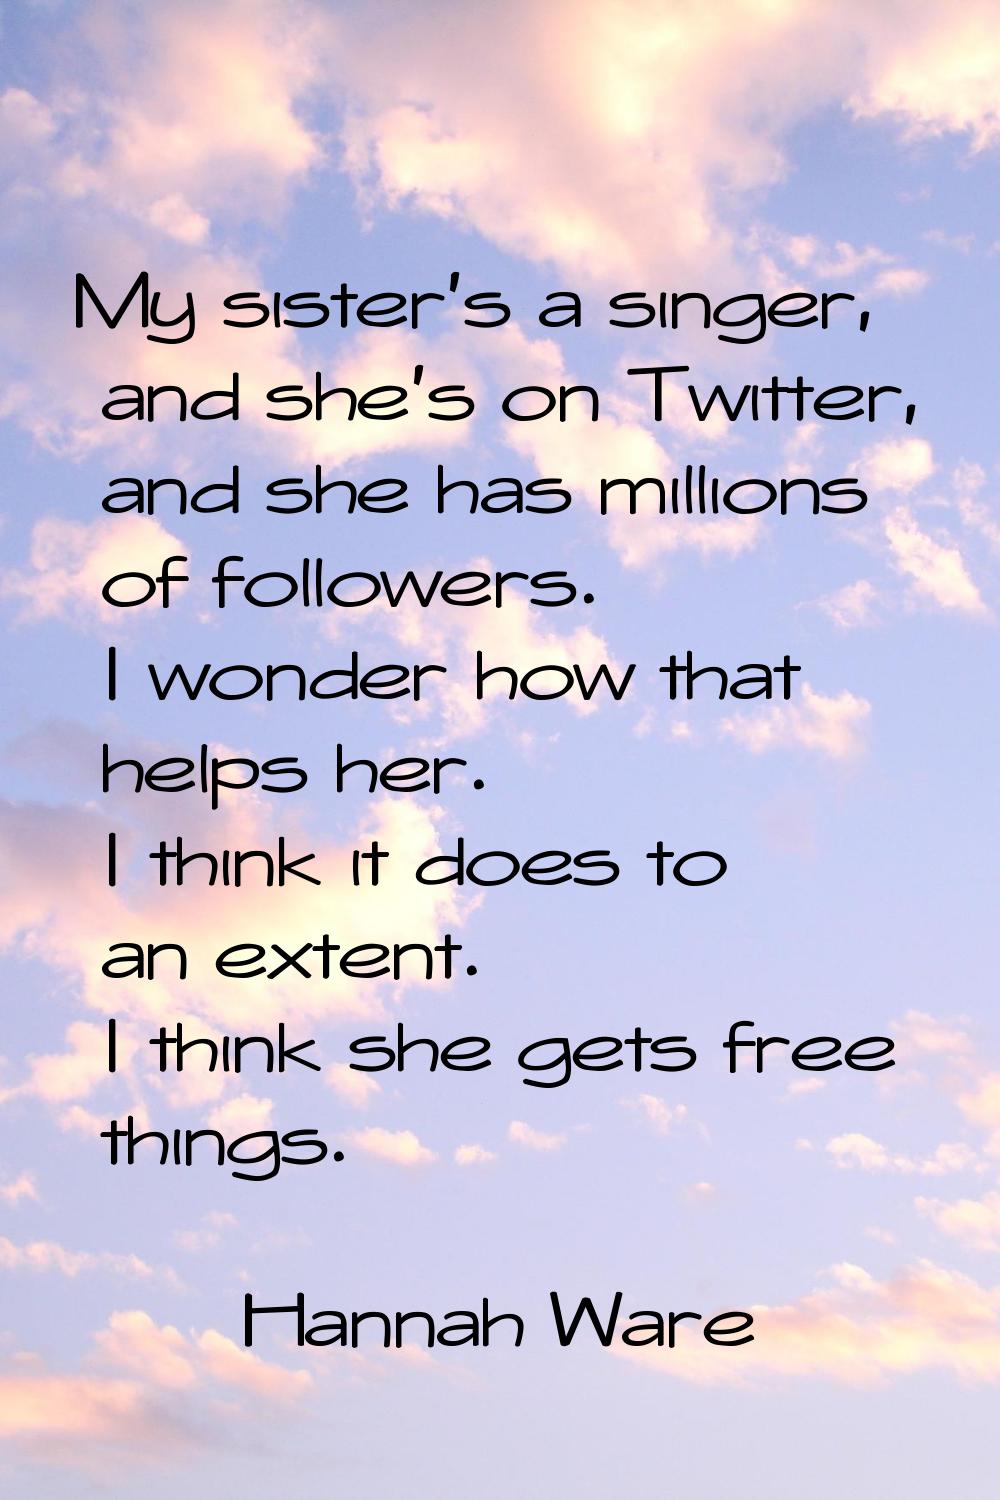 My sister's a singer, and she's on Twitter, and she has millions of followers. I wonder how that he